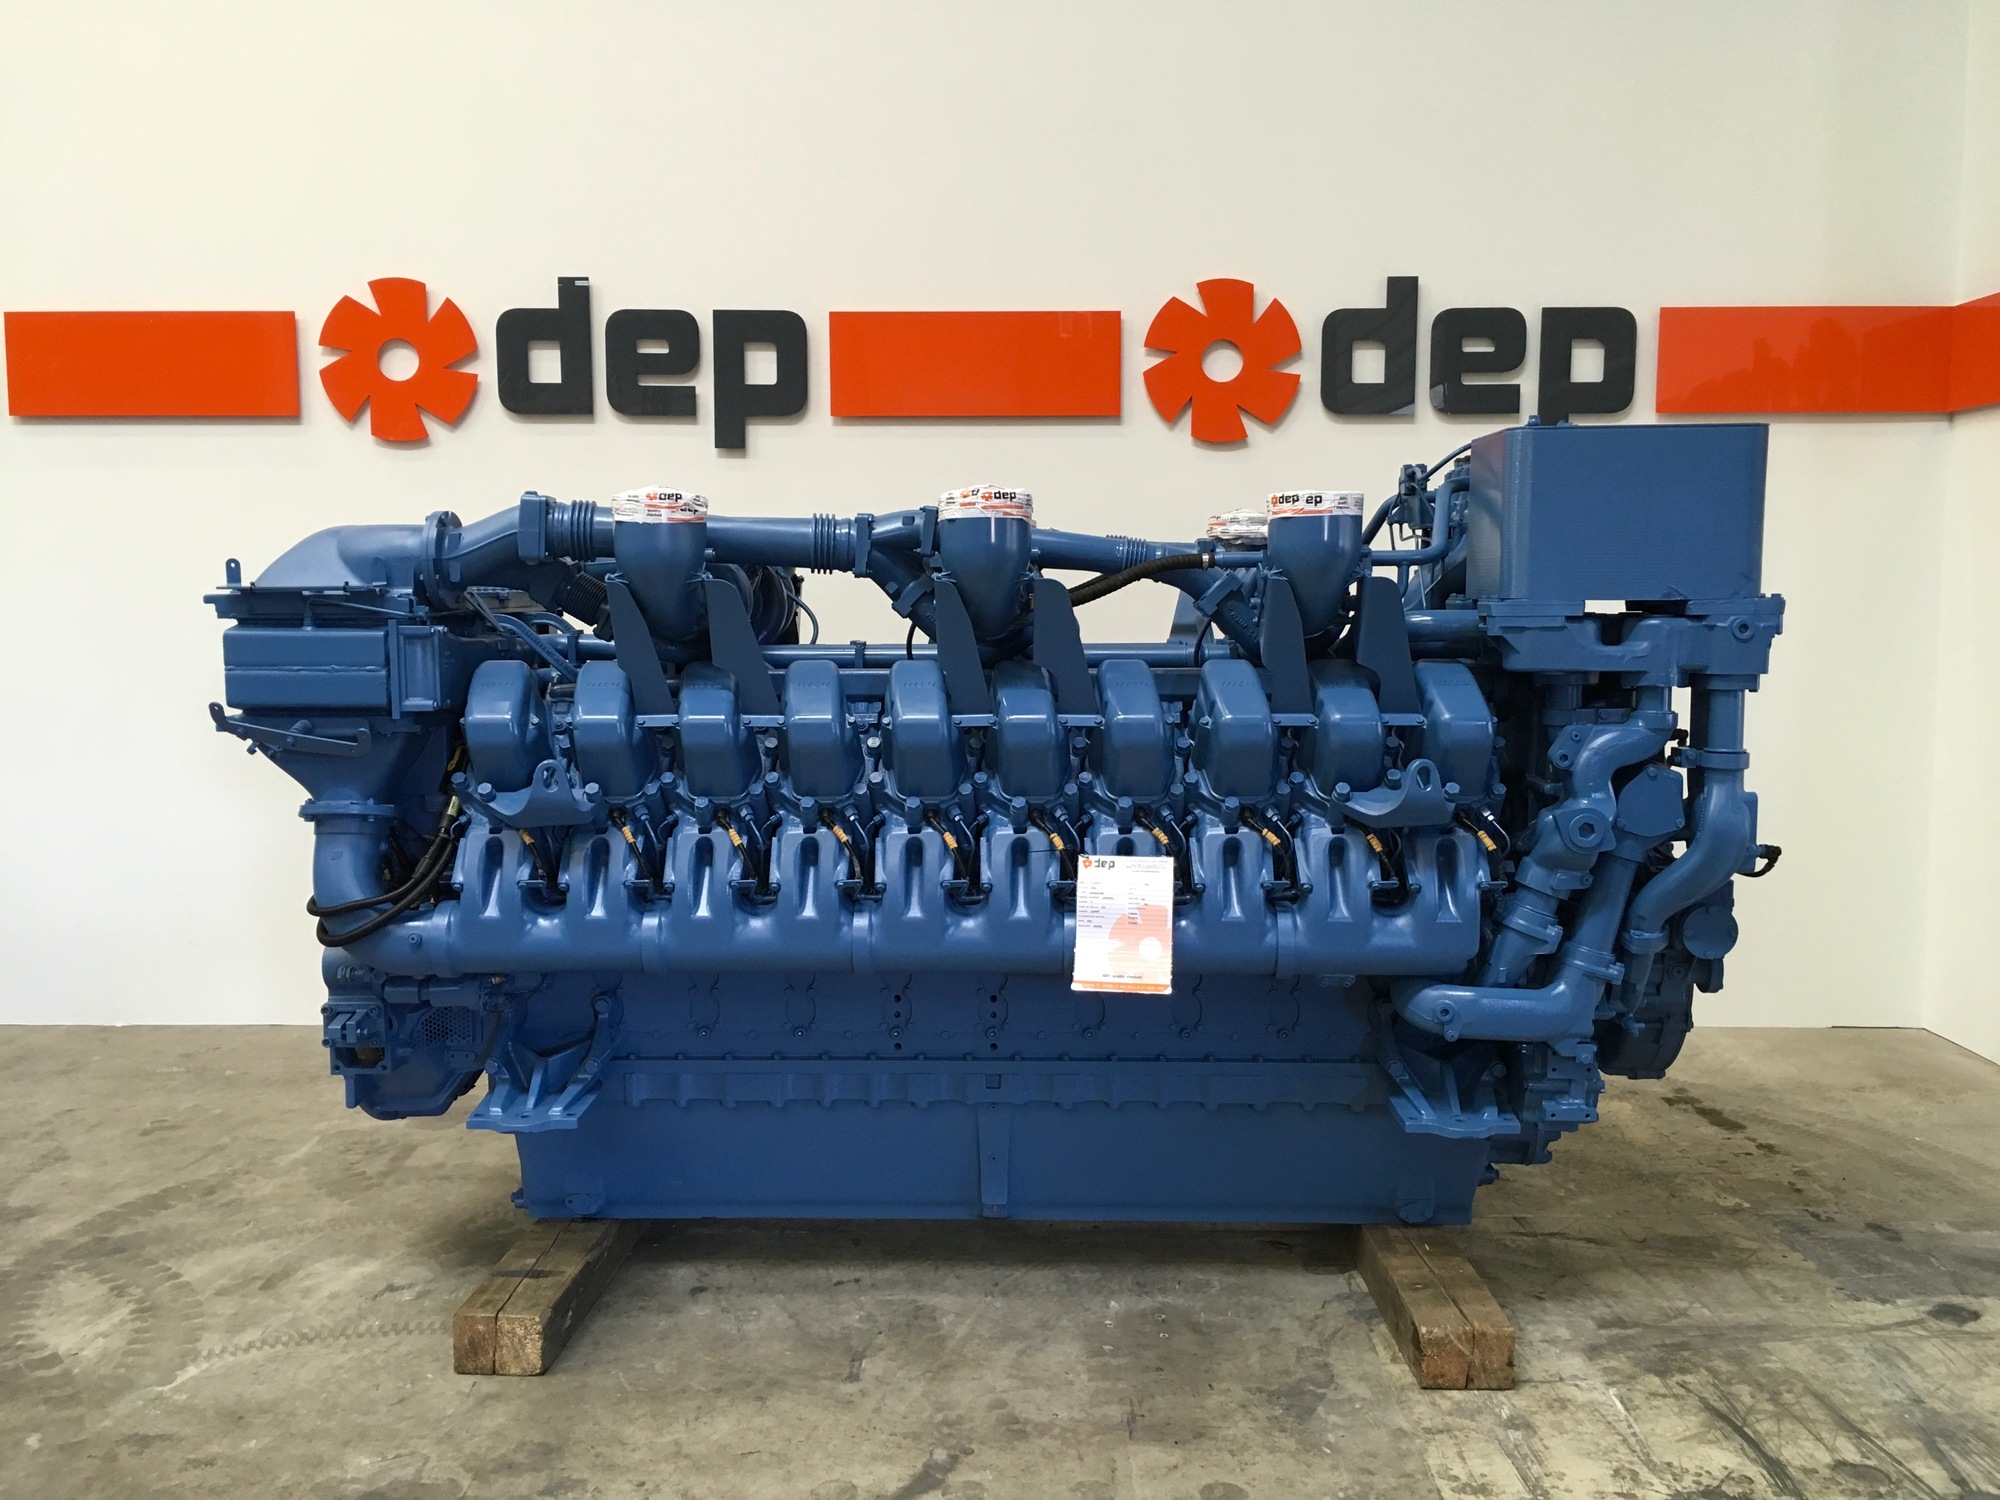 DUTCH ENGINES AND PUMPS undefined: slika 1